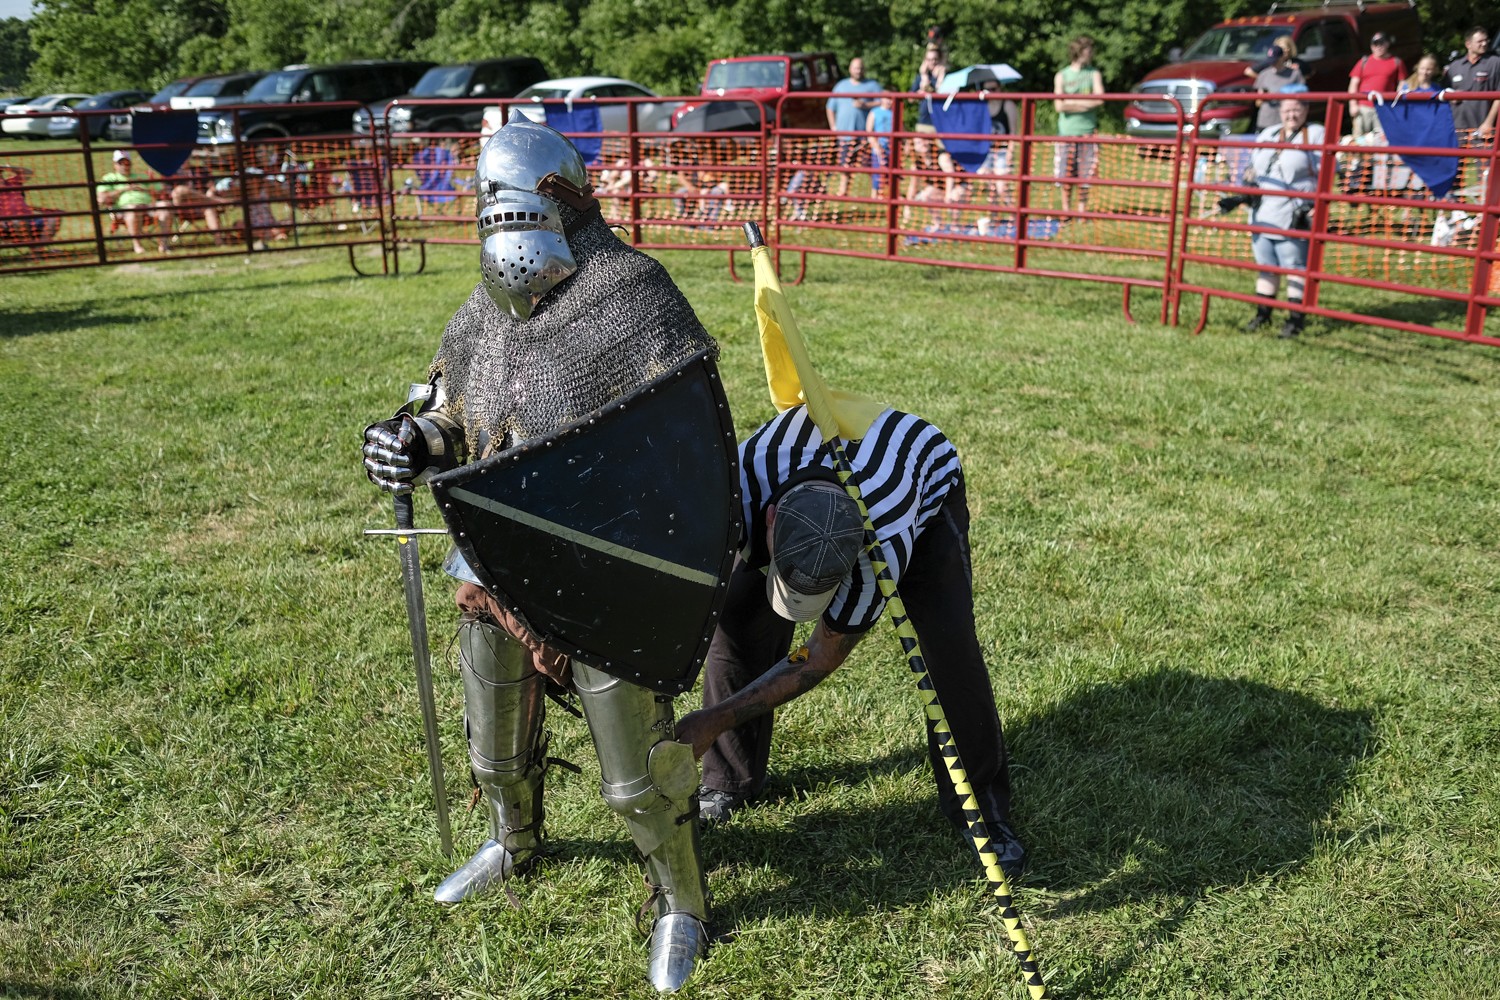 The referee checks a knight&#146;s armor between rounds.